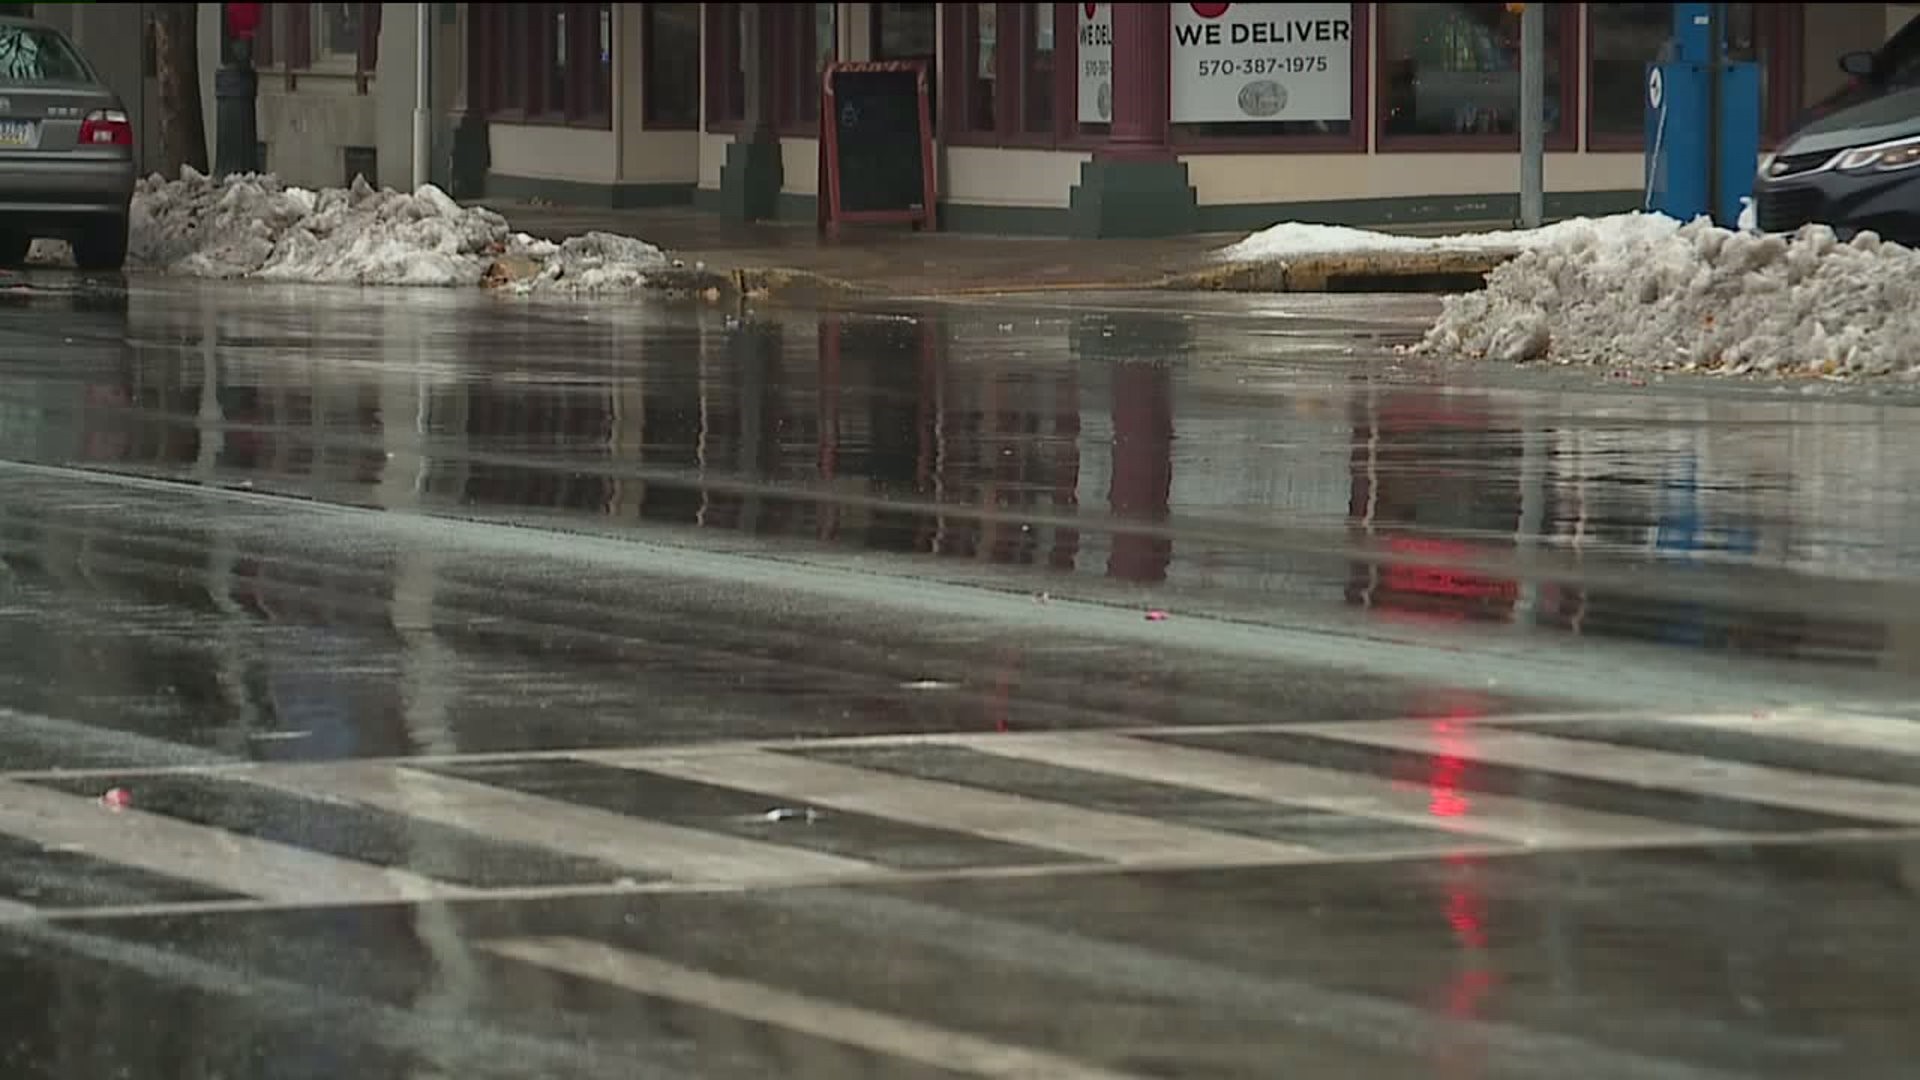 Icy Conditions Temporarily Shut Down Road in Bloomsburg